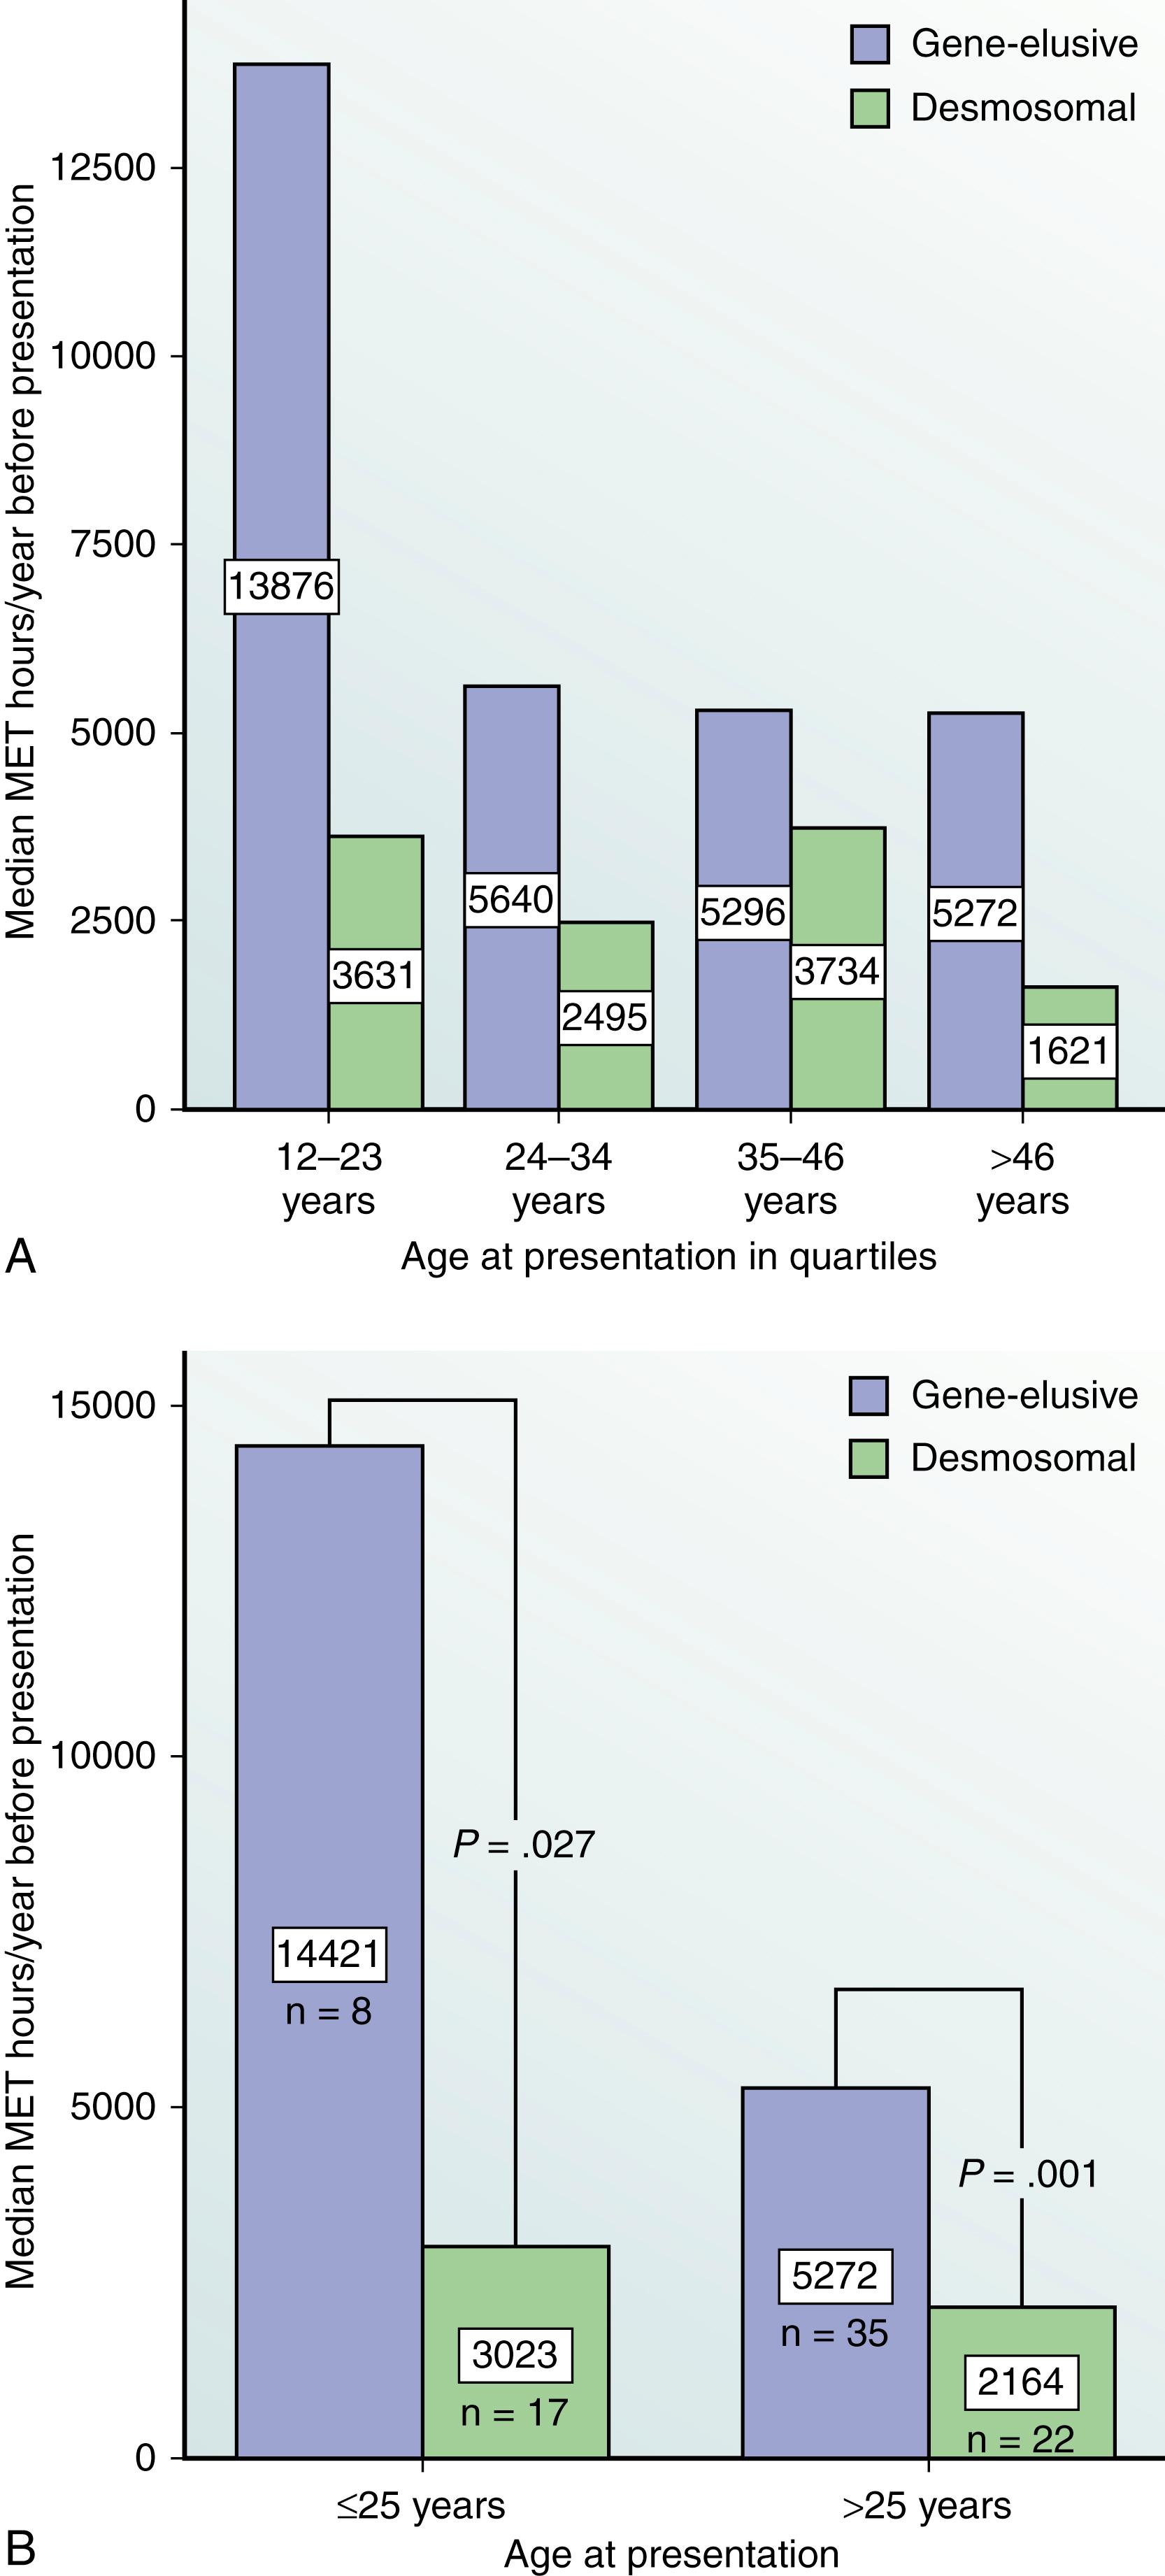 Fig. 90.5, Exercise intensity (median metabolic equivalent hours [MET hours] per year) stratified by (A) quartiles of age of clinical presentation and (B) age of clinical presentation before and after age 25 years. Gene-elusive patients had done more intense exercise regardless of age of presentation. Among patients presenting by age 25 years, there is a fivefold difference in intensity.